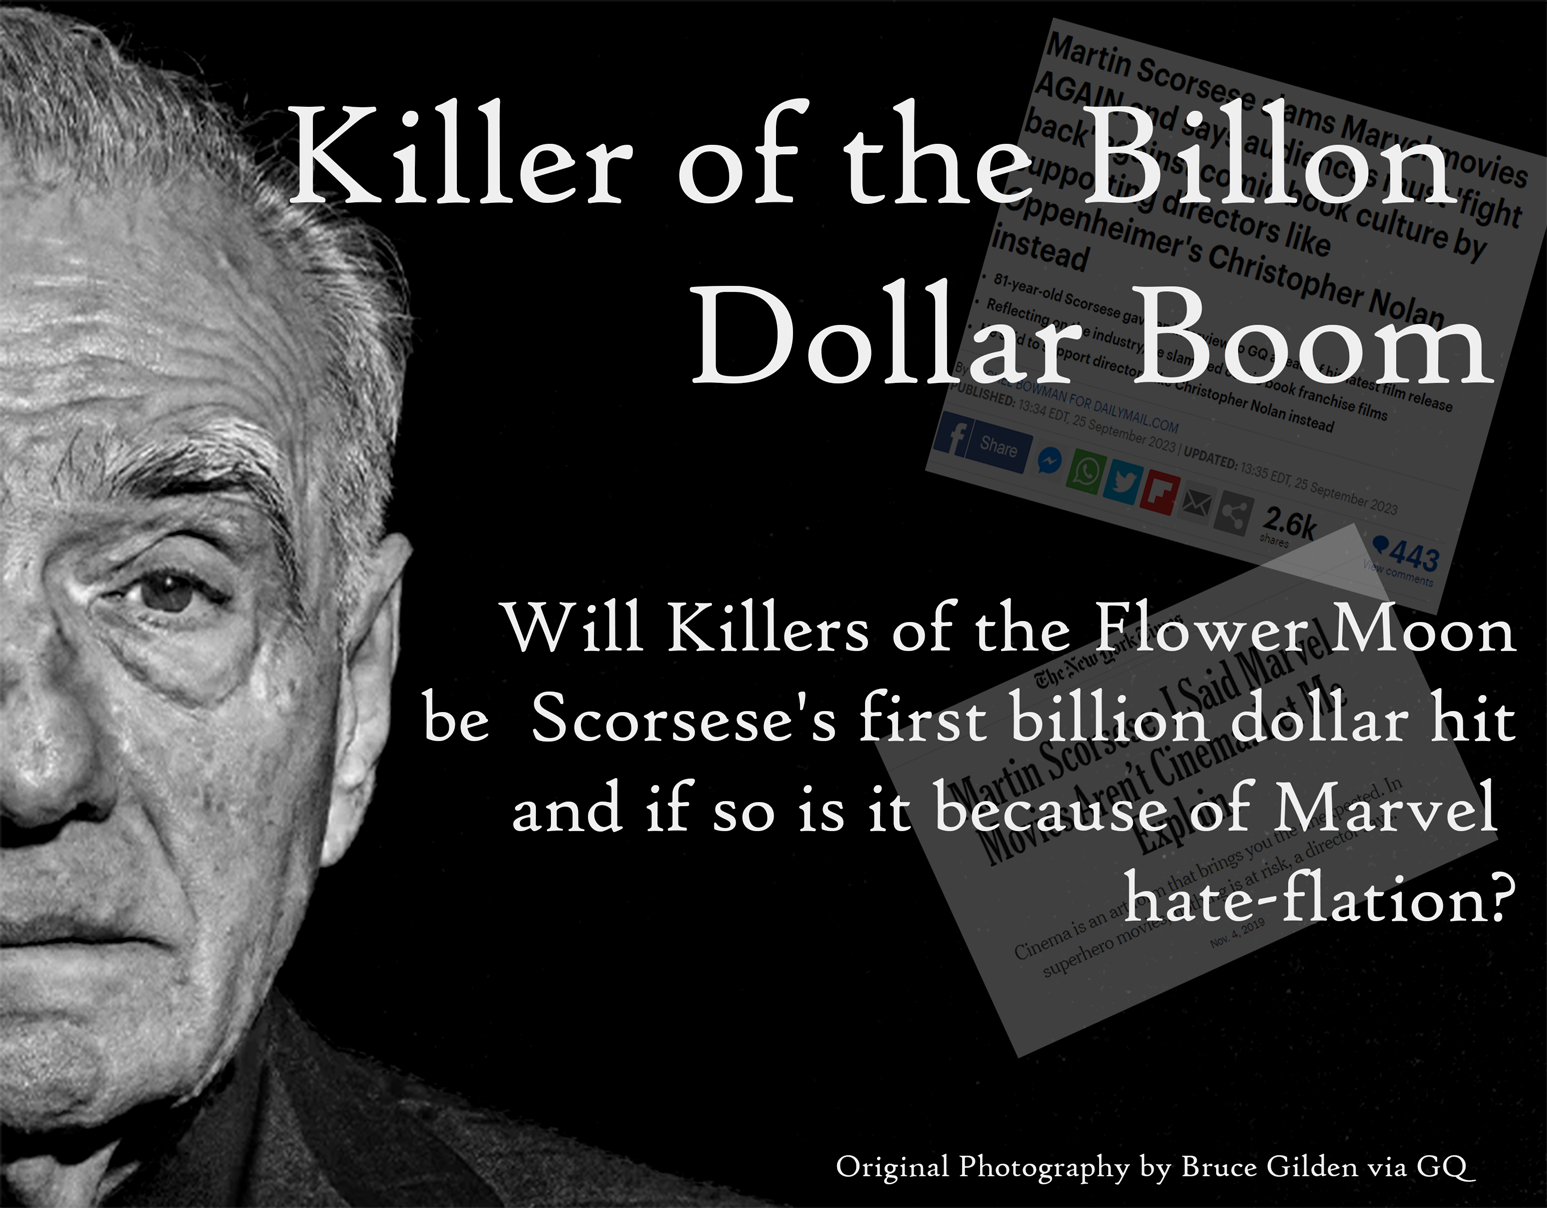 Will Killers of the Flower Moon be Scorsese’s first billion dollar hit and if so is it because of Marvel hate-flation?